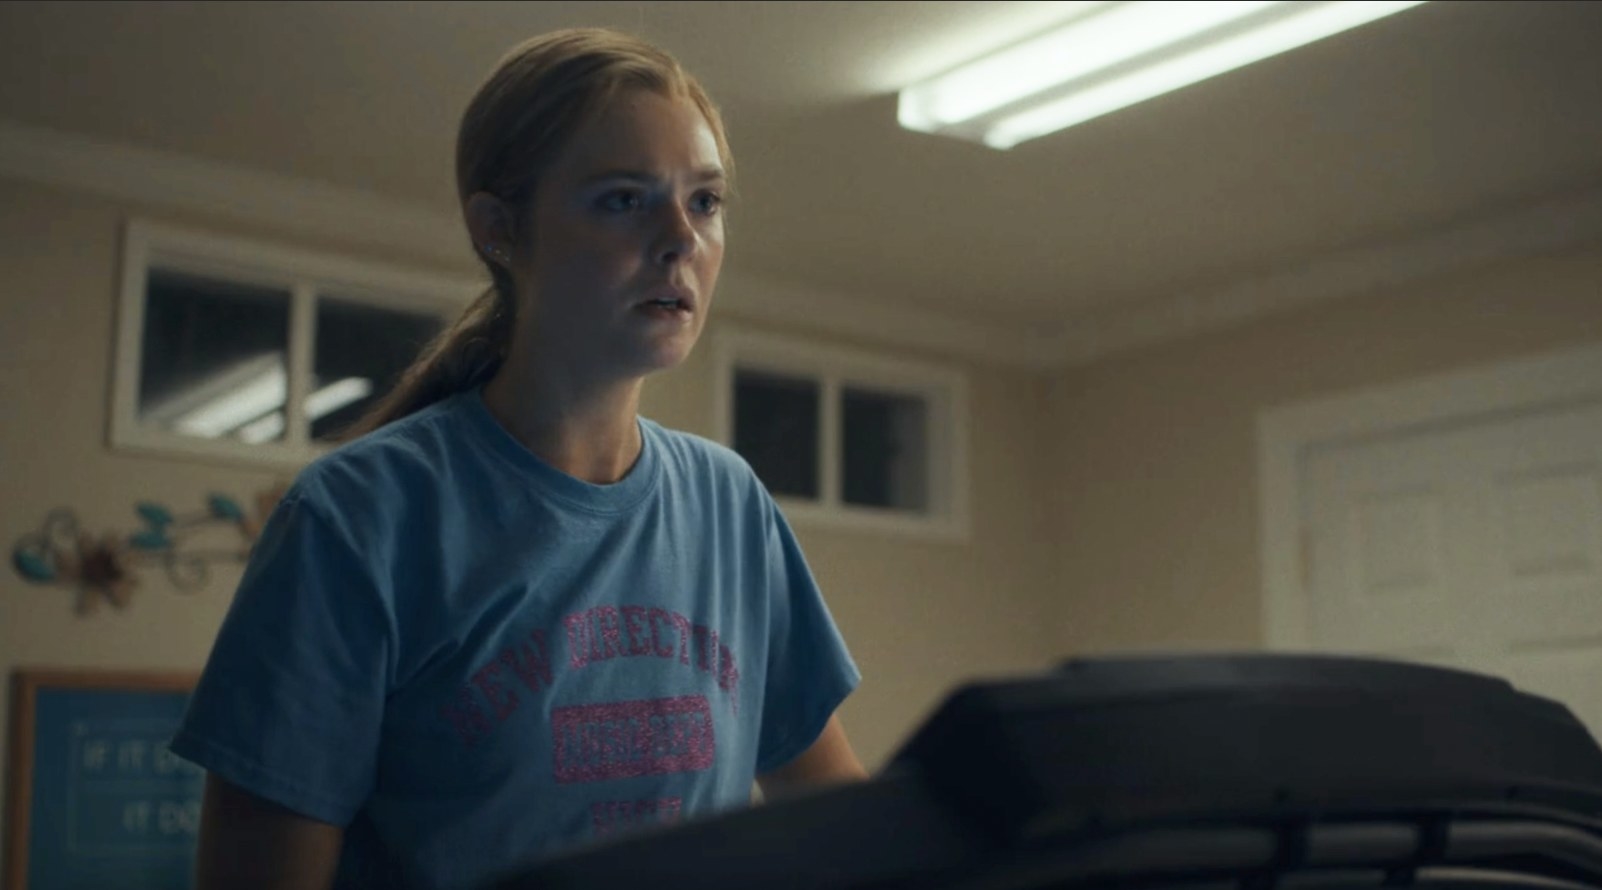 Michelle looks shocked on a treadmill wearing a shirt that says &quot;New Directions&quot;